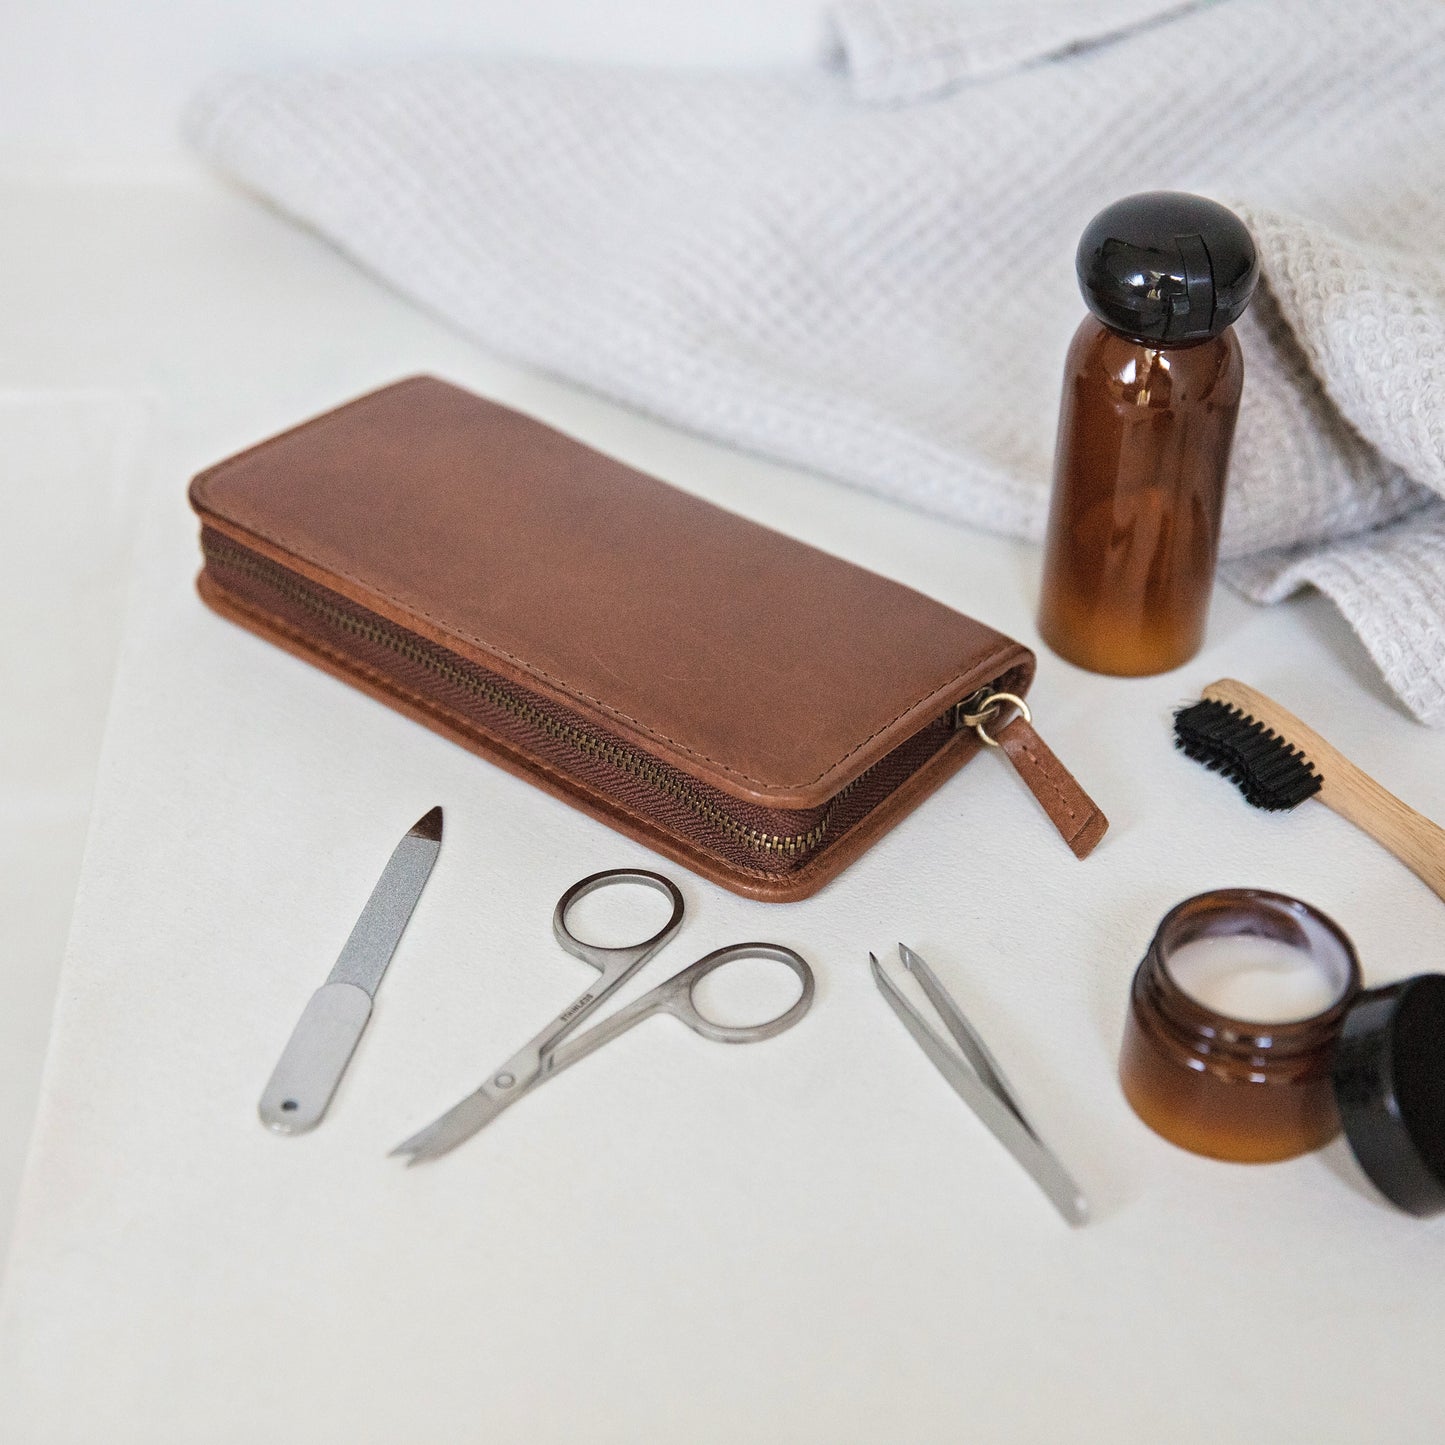 Men’s manicure set with nail clippers, in a stylish zippable soft tan leather case. Add a name or message to create a thoughtful leather anniversary gift for him or a personalised Father’s Day gift.